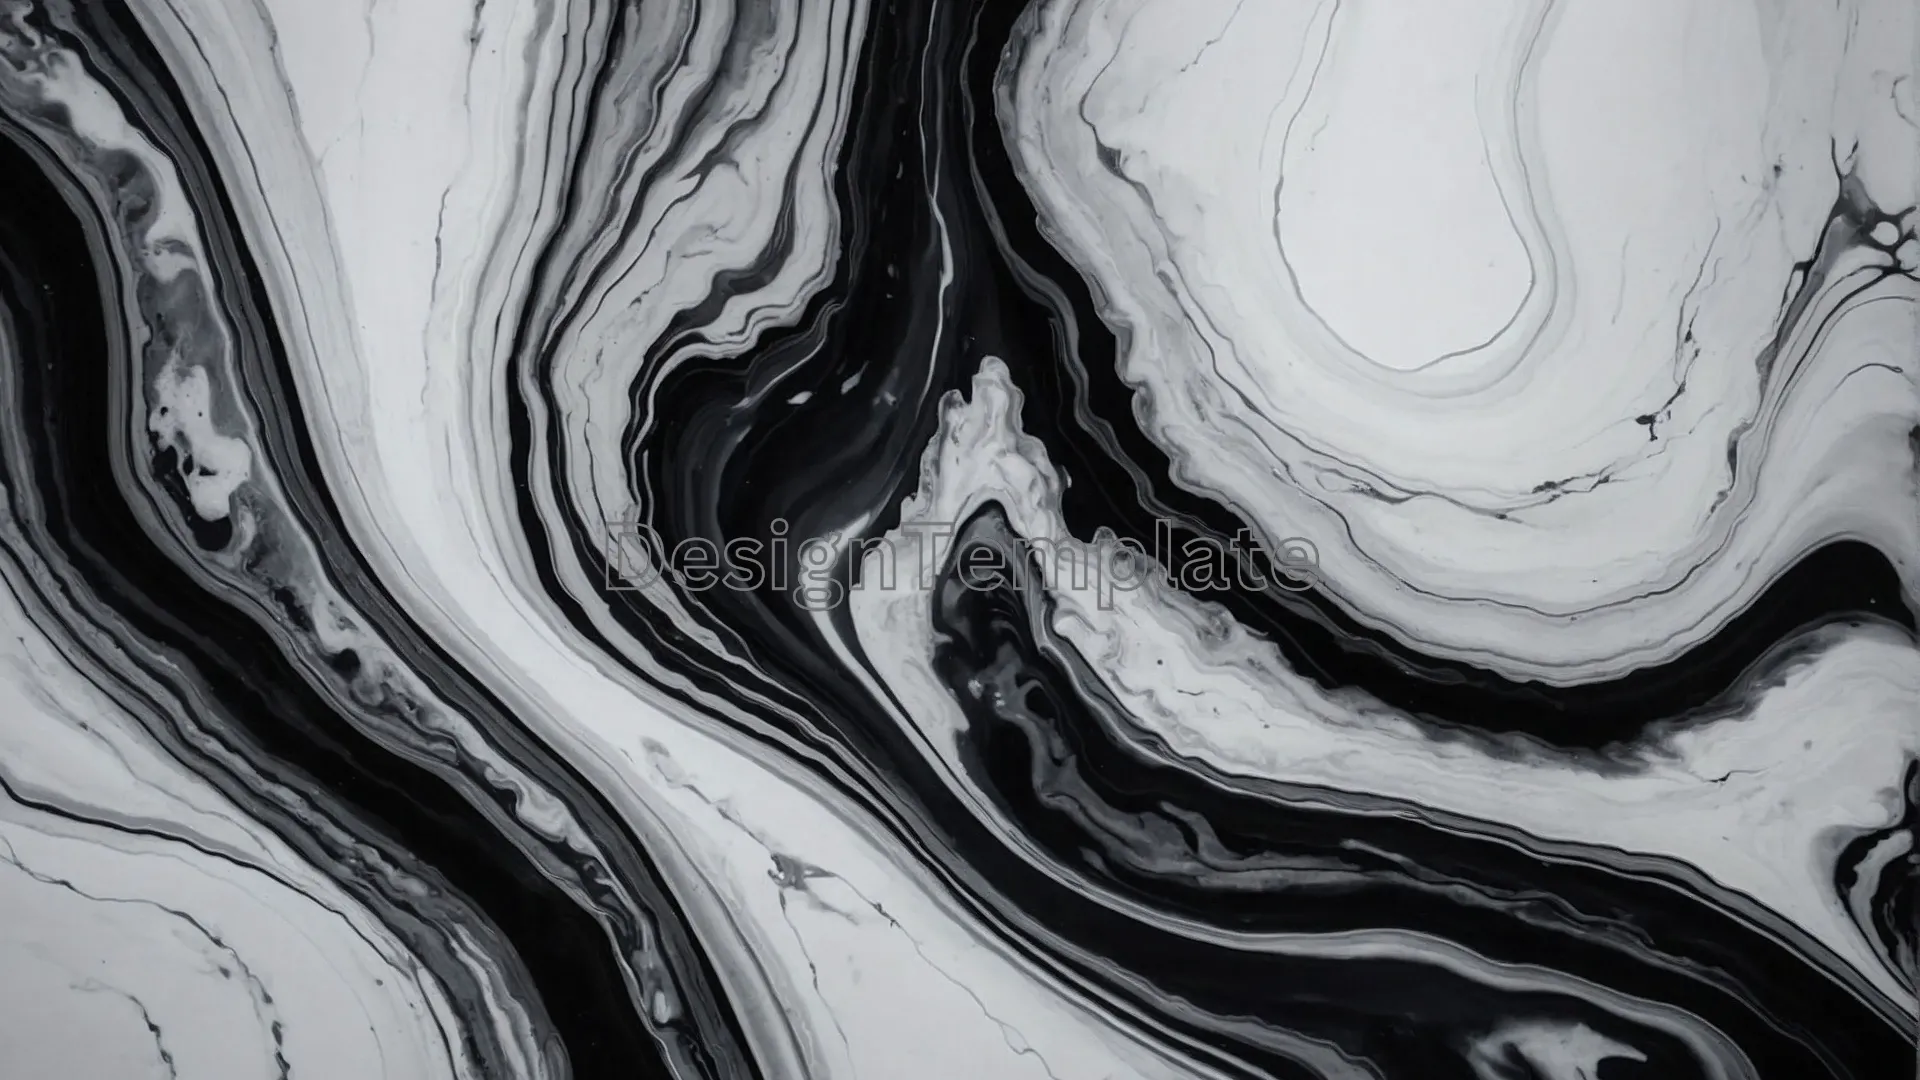 Fluidity Black and White Marble Background for Graphicsc